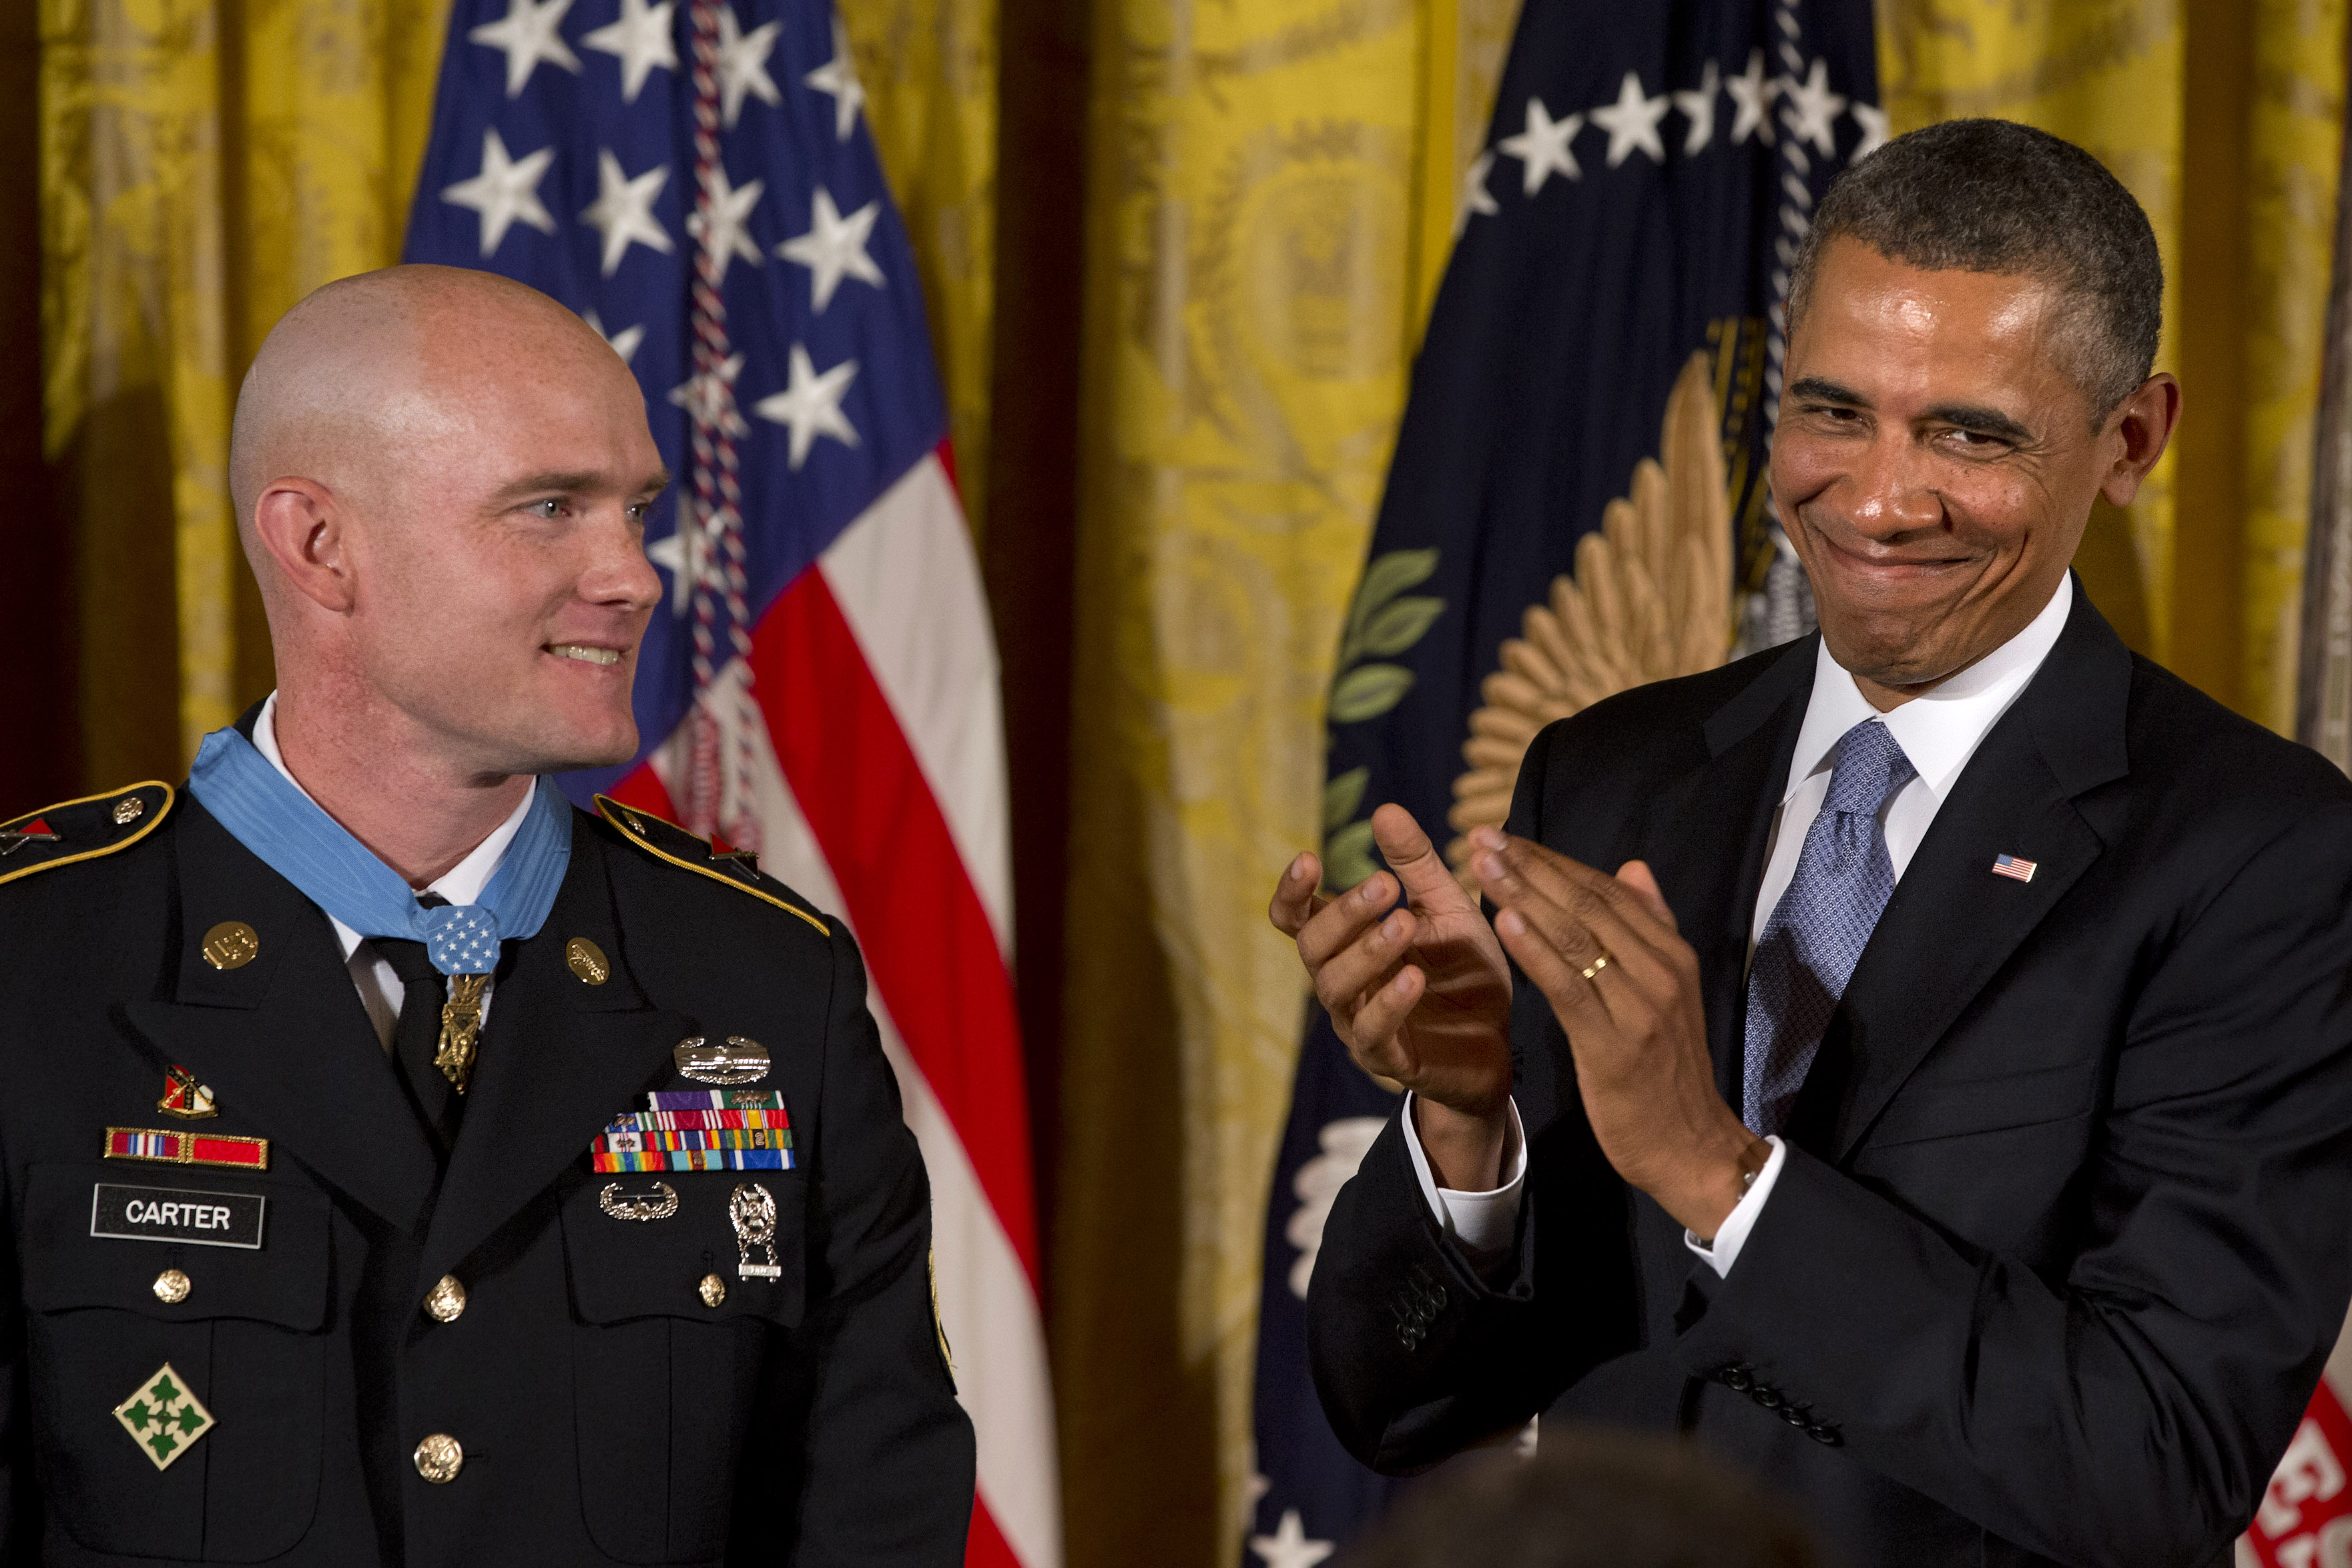 Obama awards Medal of Honor, highest US military decoration, to Afghanistan  hero